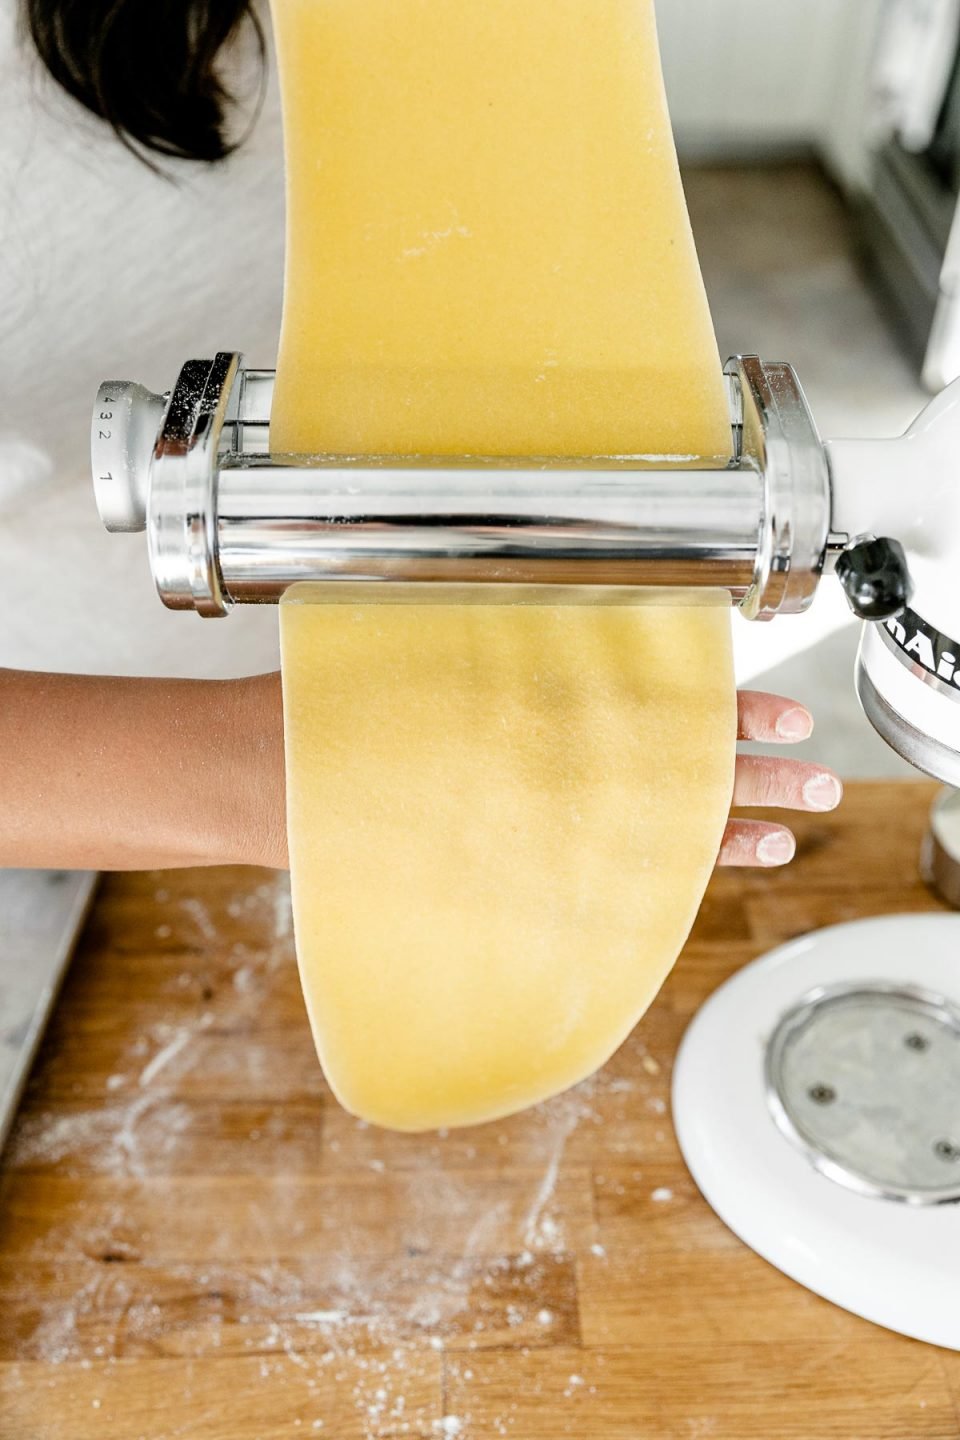 Jess of Plays Well With Butter uses her hands to feed a piece of homemade pasta dough through a pasta roller attachment connected to a KitchenAid Stand Mixer. Her top hand holds the sheet of dough that is being rolled out while the back of her bottom hand is used to catch the pasta dough. The Stand Mixer rests atop a butcher block countertop. The countertop has been lightly dusted with flour and an aluminum baking sheet also sits on top of the countertop.